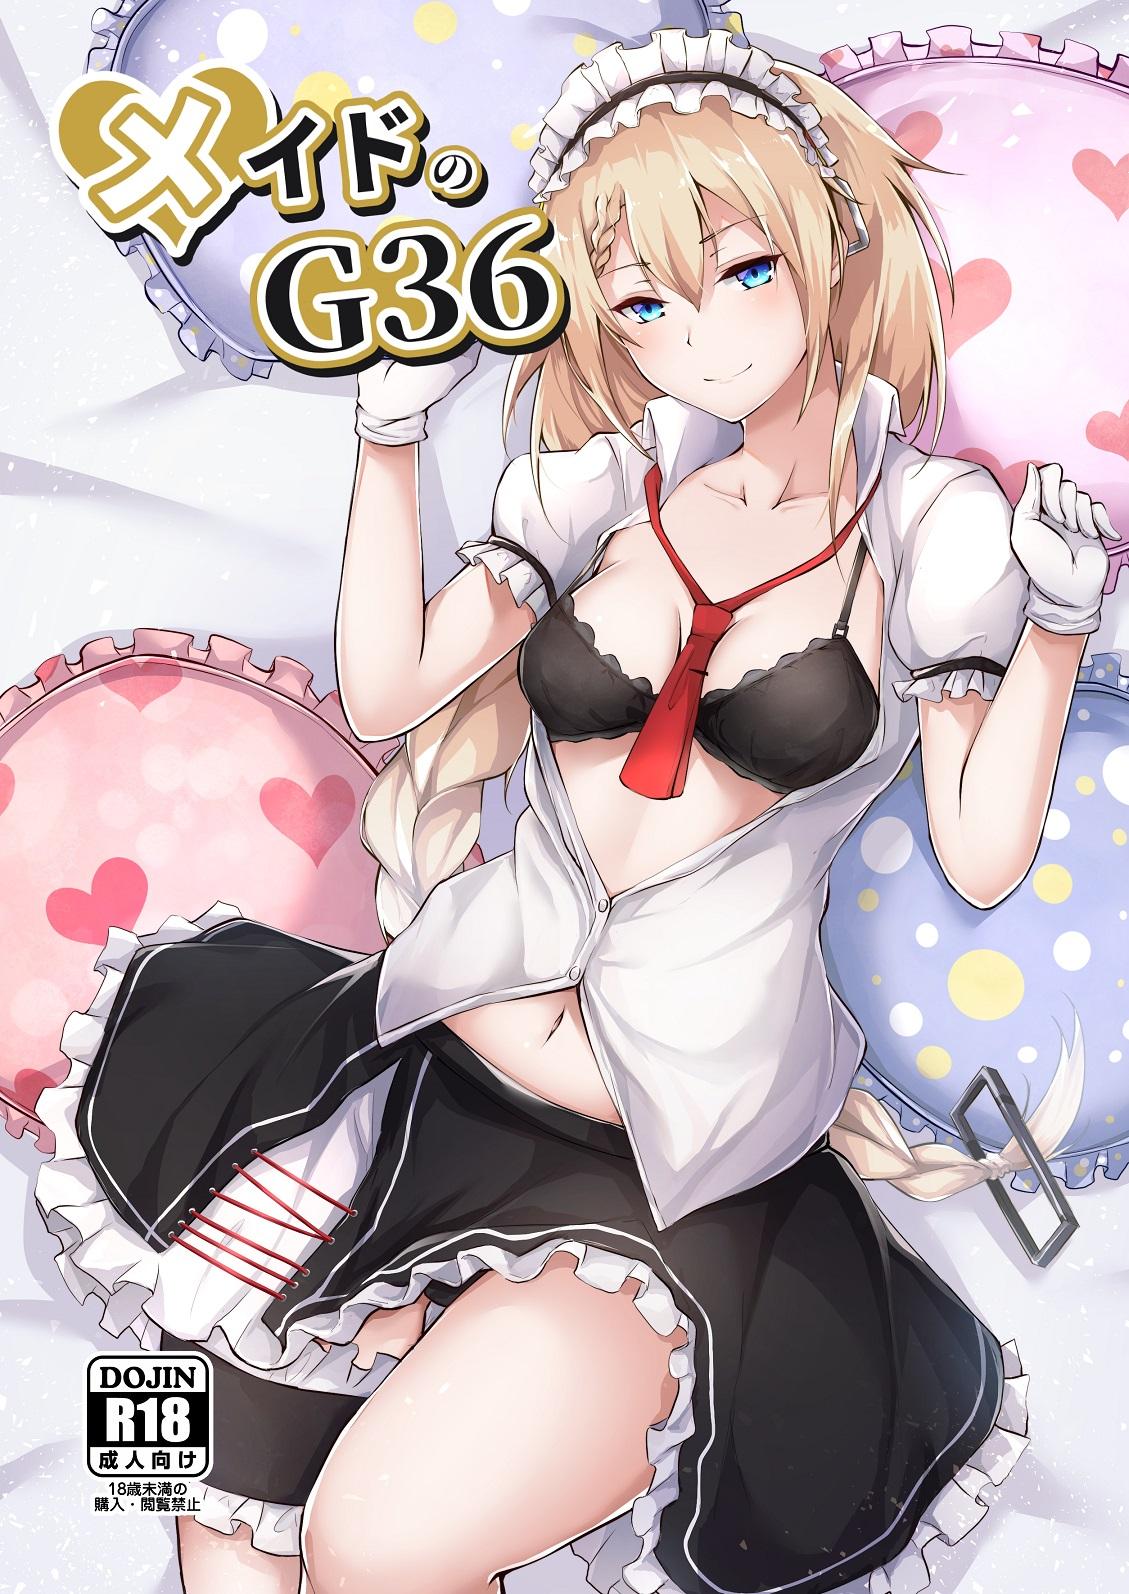 Gaypawn Maid no G36 - Girls frontline Teenporn - Picture 1